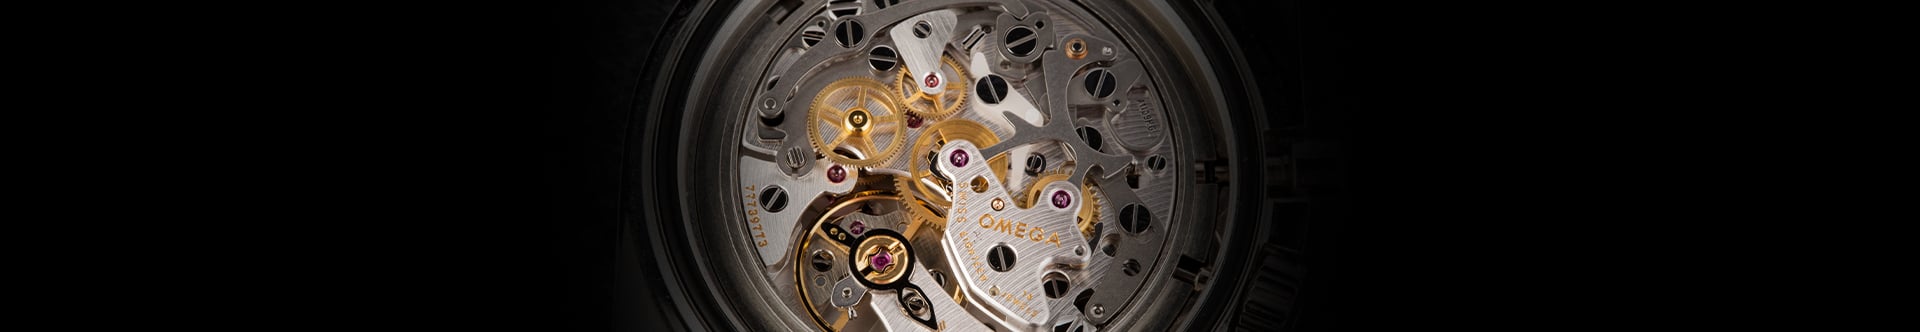 Watches and automobile, a passion for beautiful mechanisms